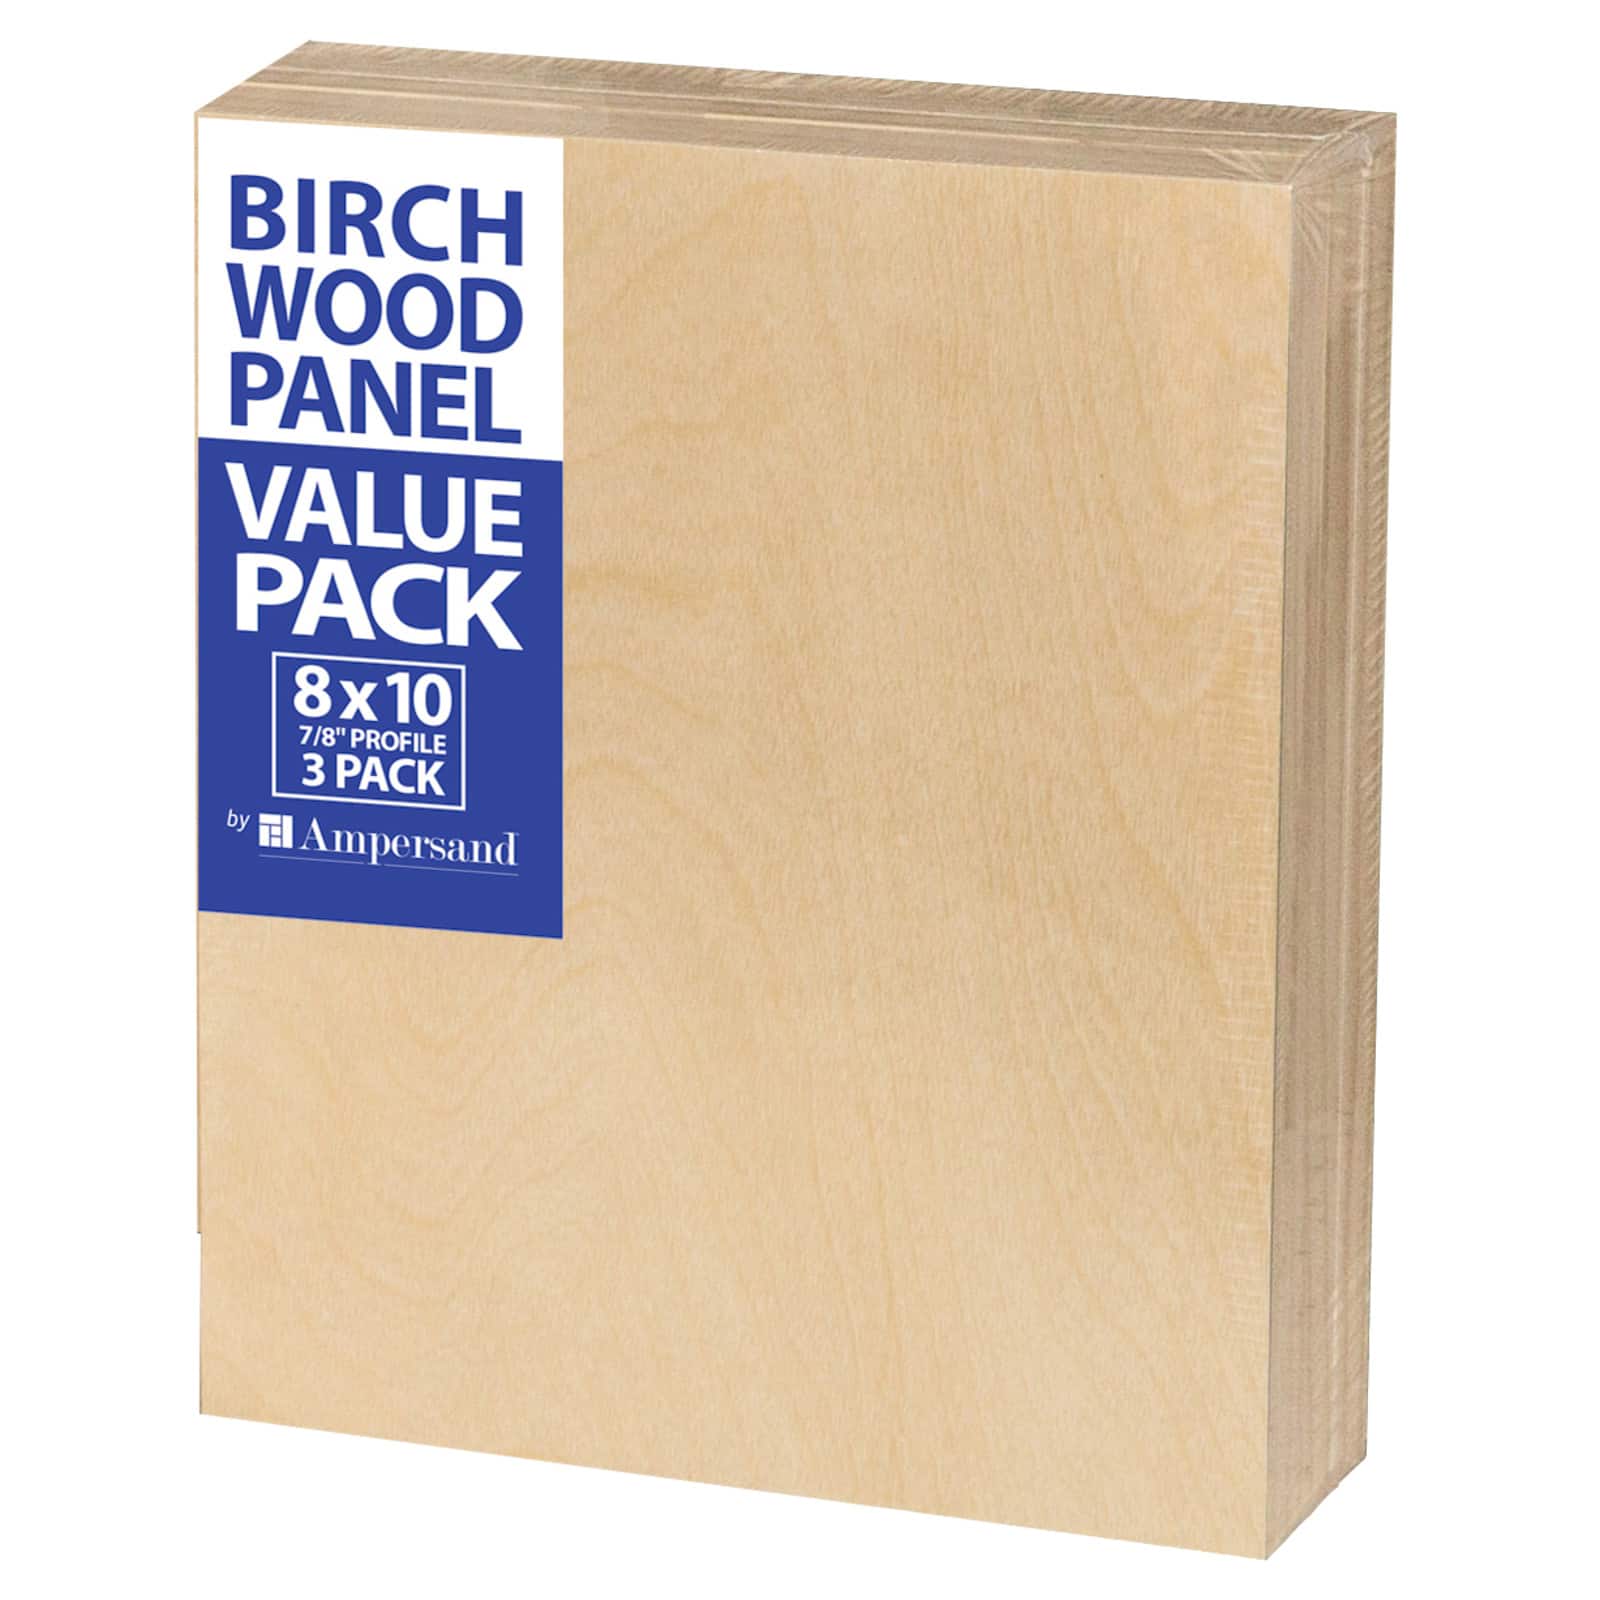 Ampersand Birch Wood Panel Value Pack, 7/8 inch thickness, 12x12 